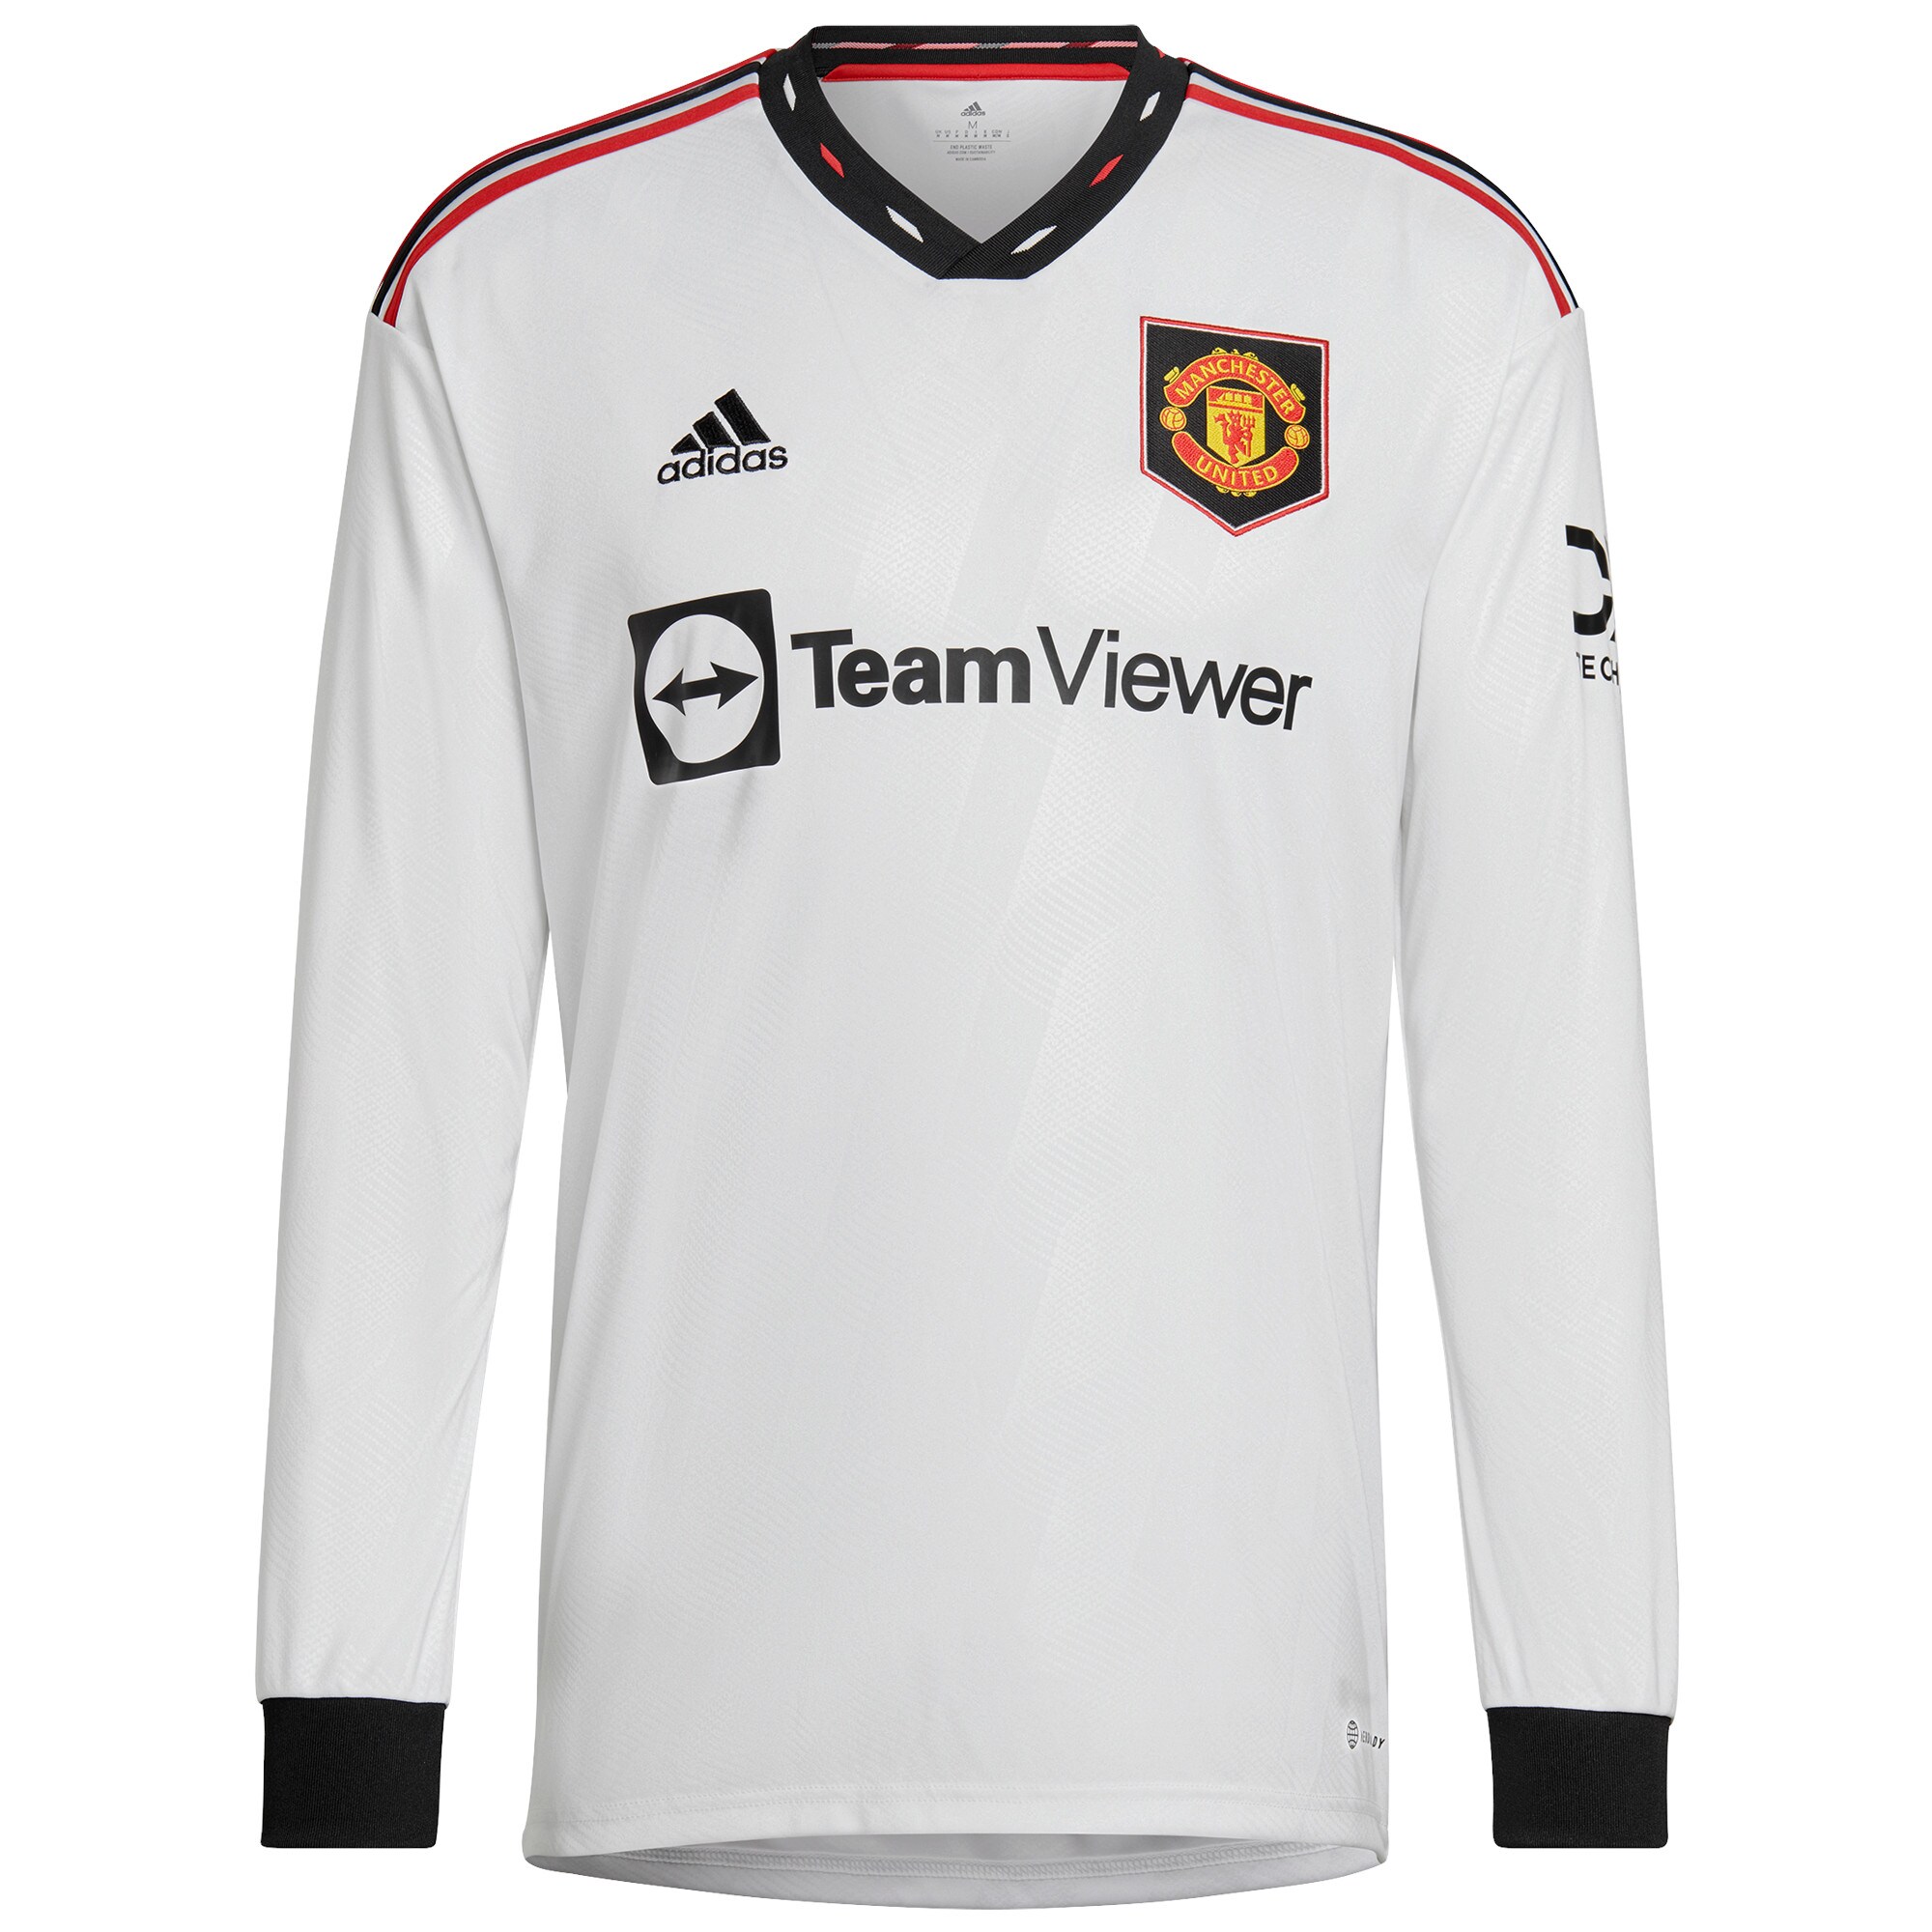 Manchester United Away Shirt 2022-23 - Long Sleeve with Dalot 20 printing